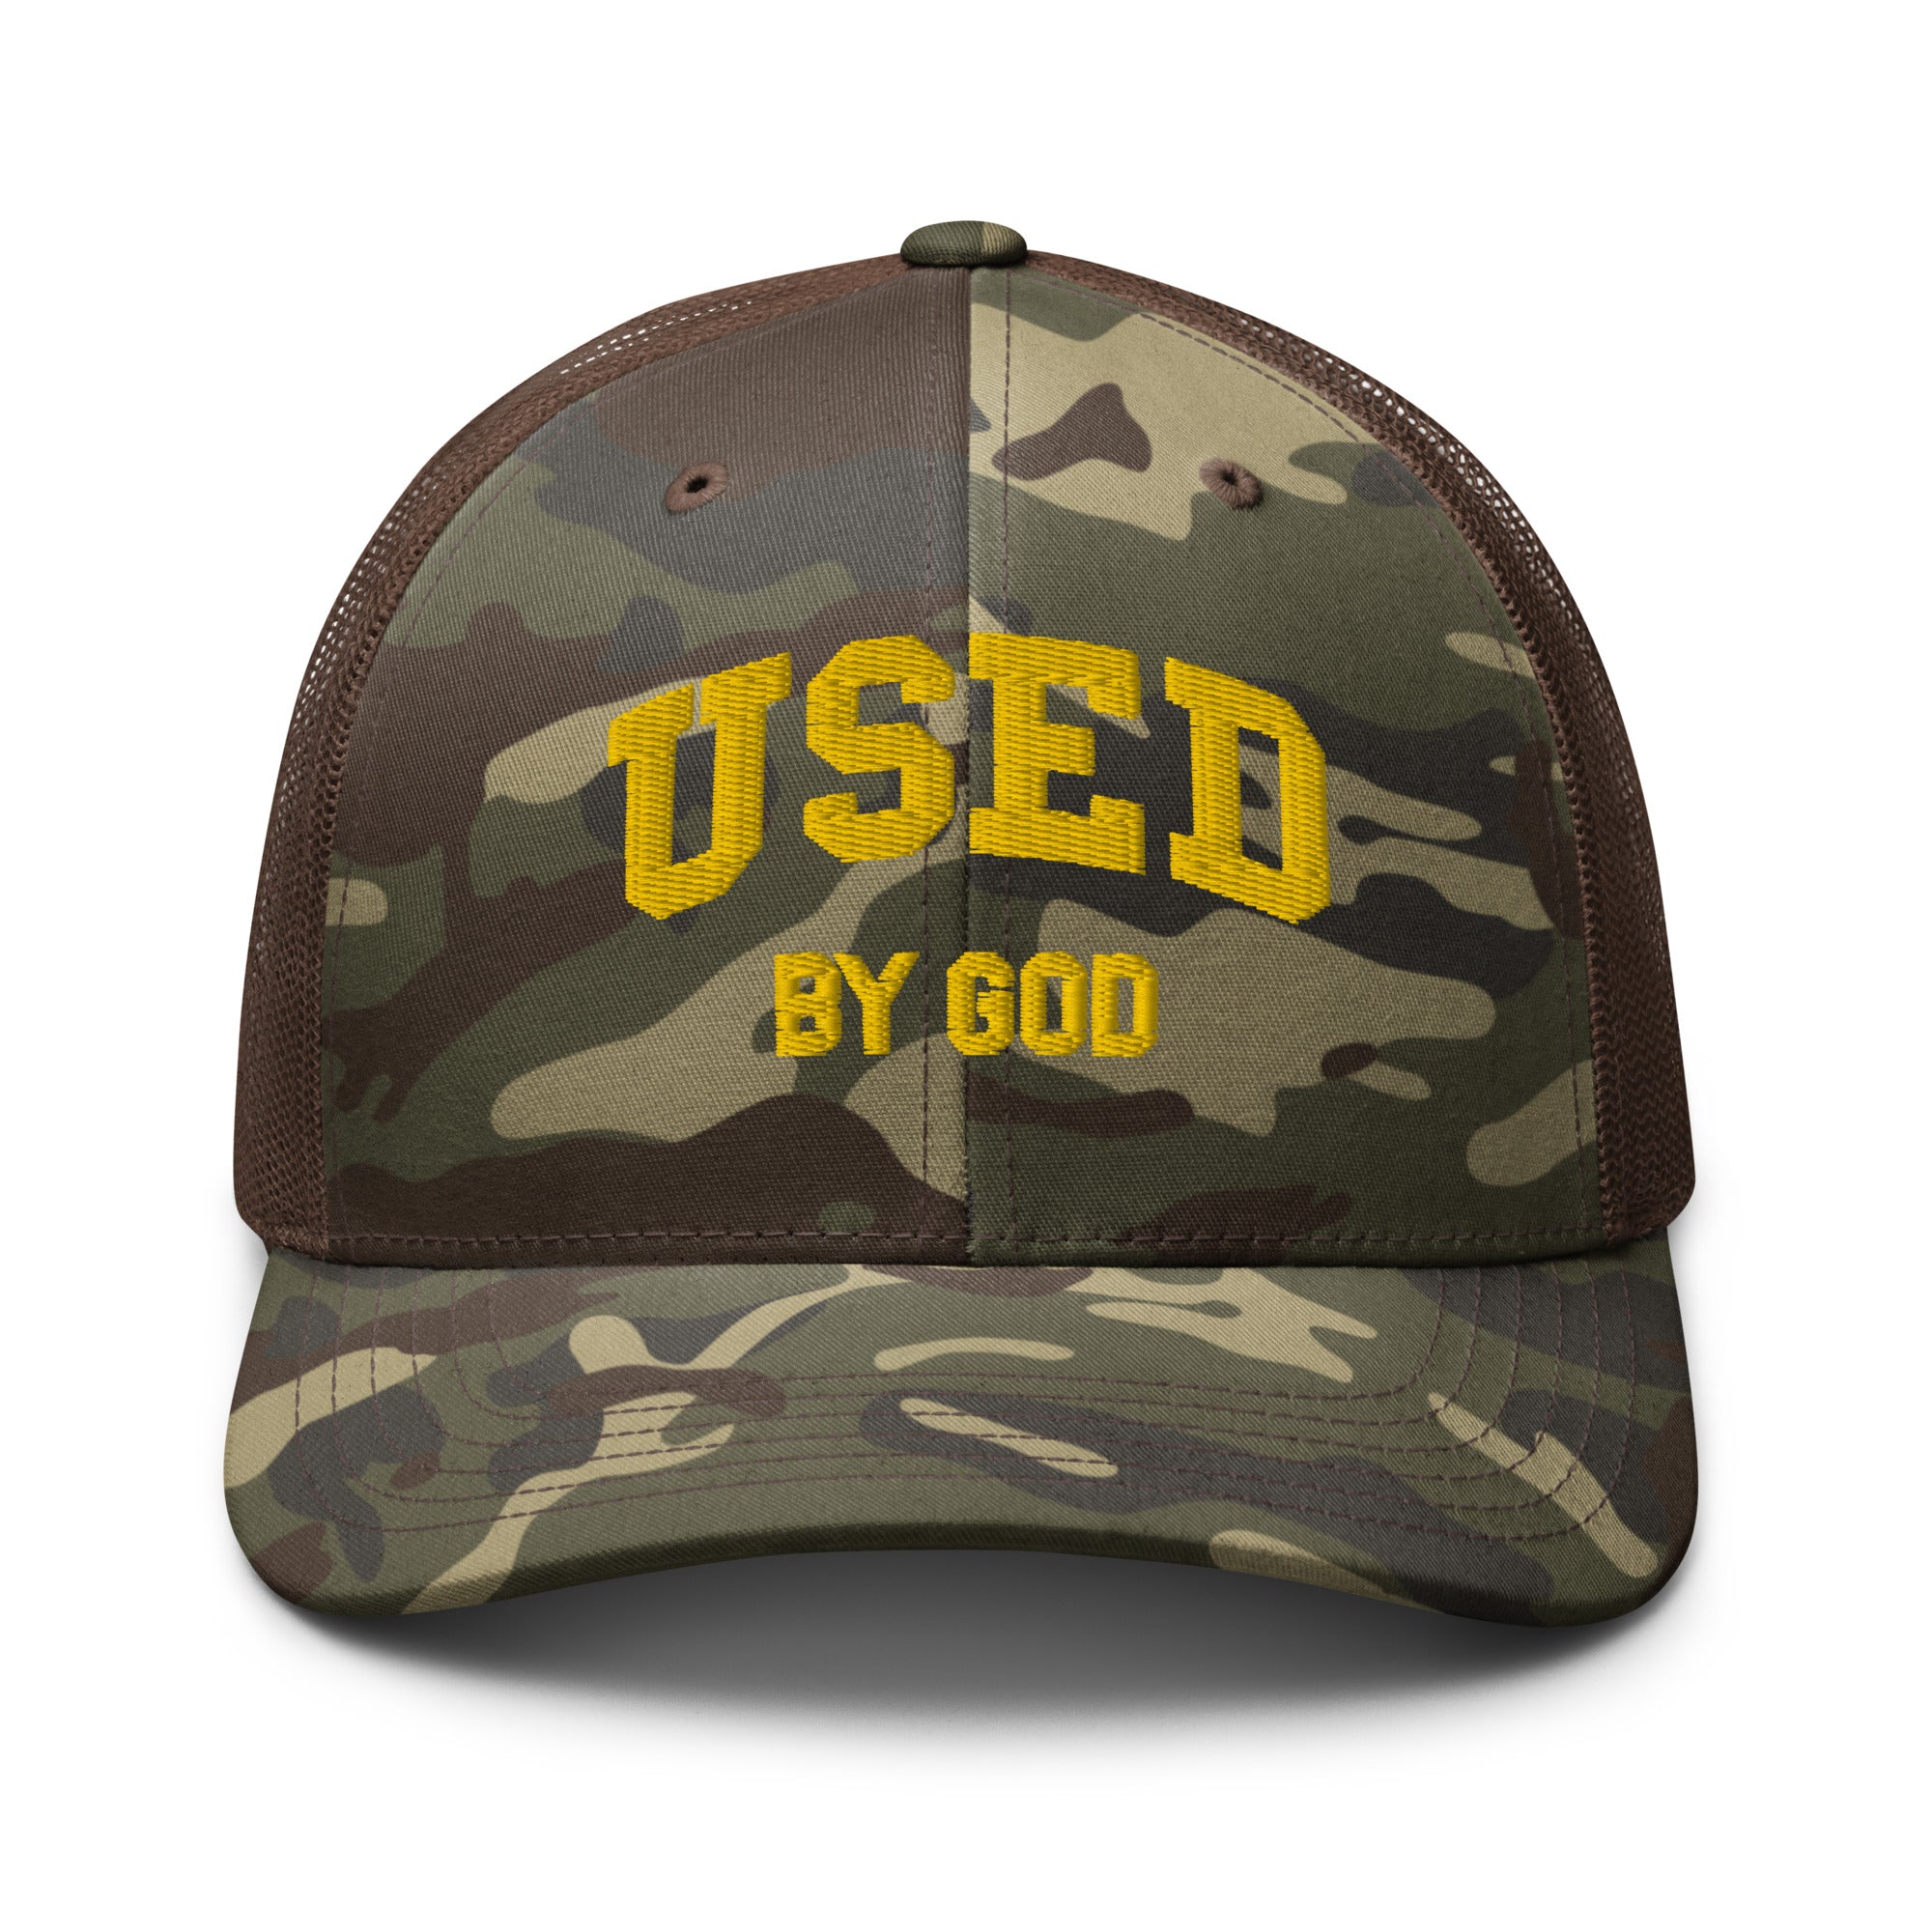 UBG Collegiate Camo Sun Trucker Hat, Used By God, Used By God Clothing, Christian Apparel, Christian Hats, Christian T-Shirts, Christian Clothing, God Shirts, Christian Sweatshirts, God Clothing, Jesus Hoodie, Jesus Clothes, God Is Dope, Art Of Homage, Red Letter Clothing, Elevated Faith, Active Faith Sports, Beacon Threads, God The Father Apparel